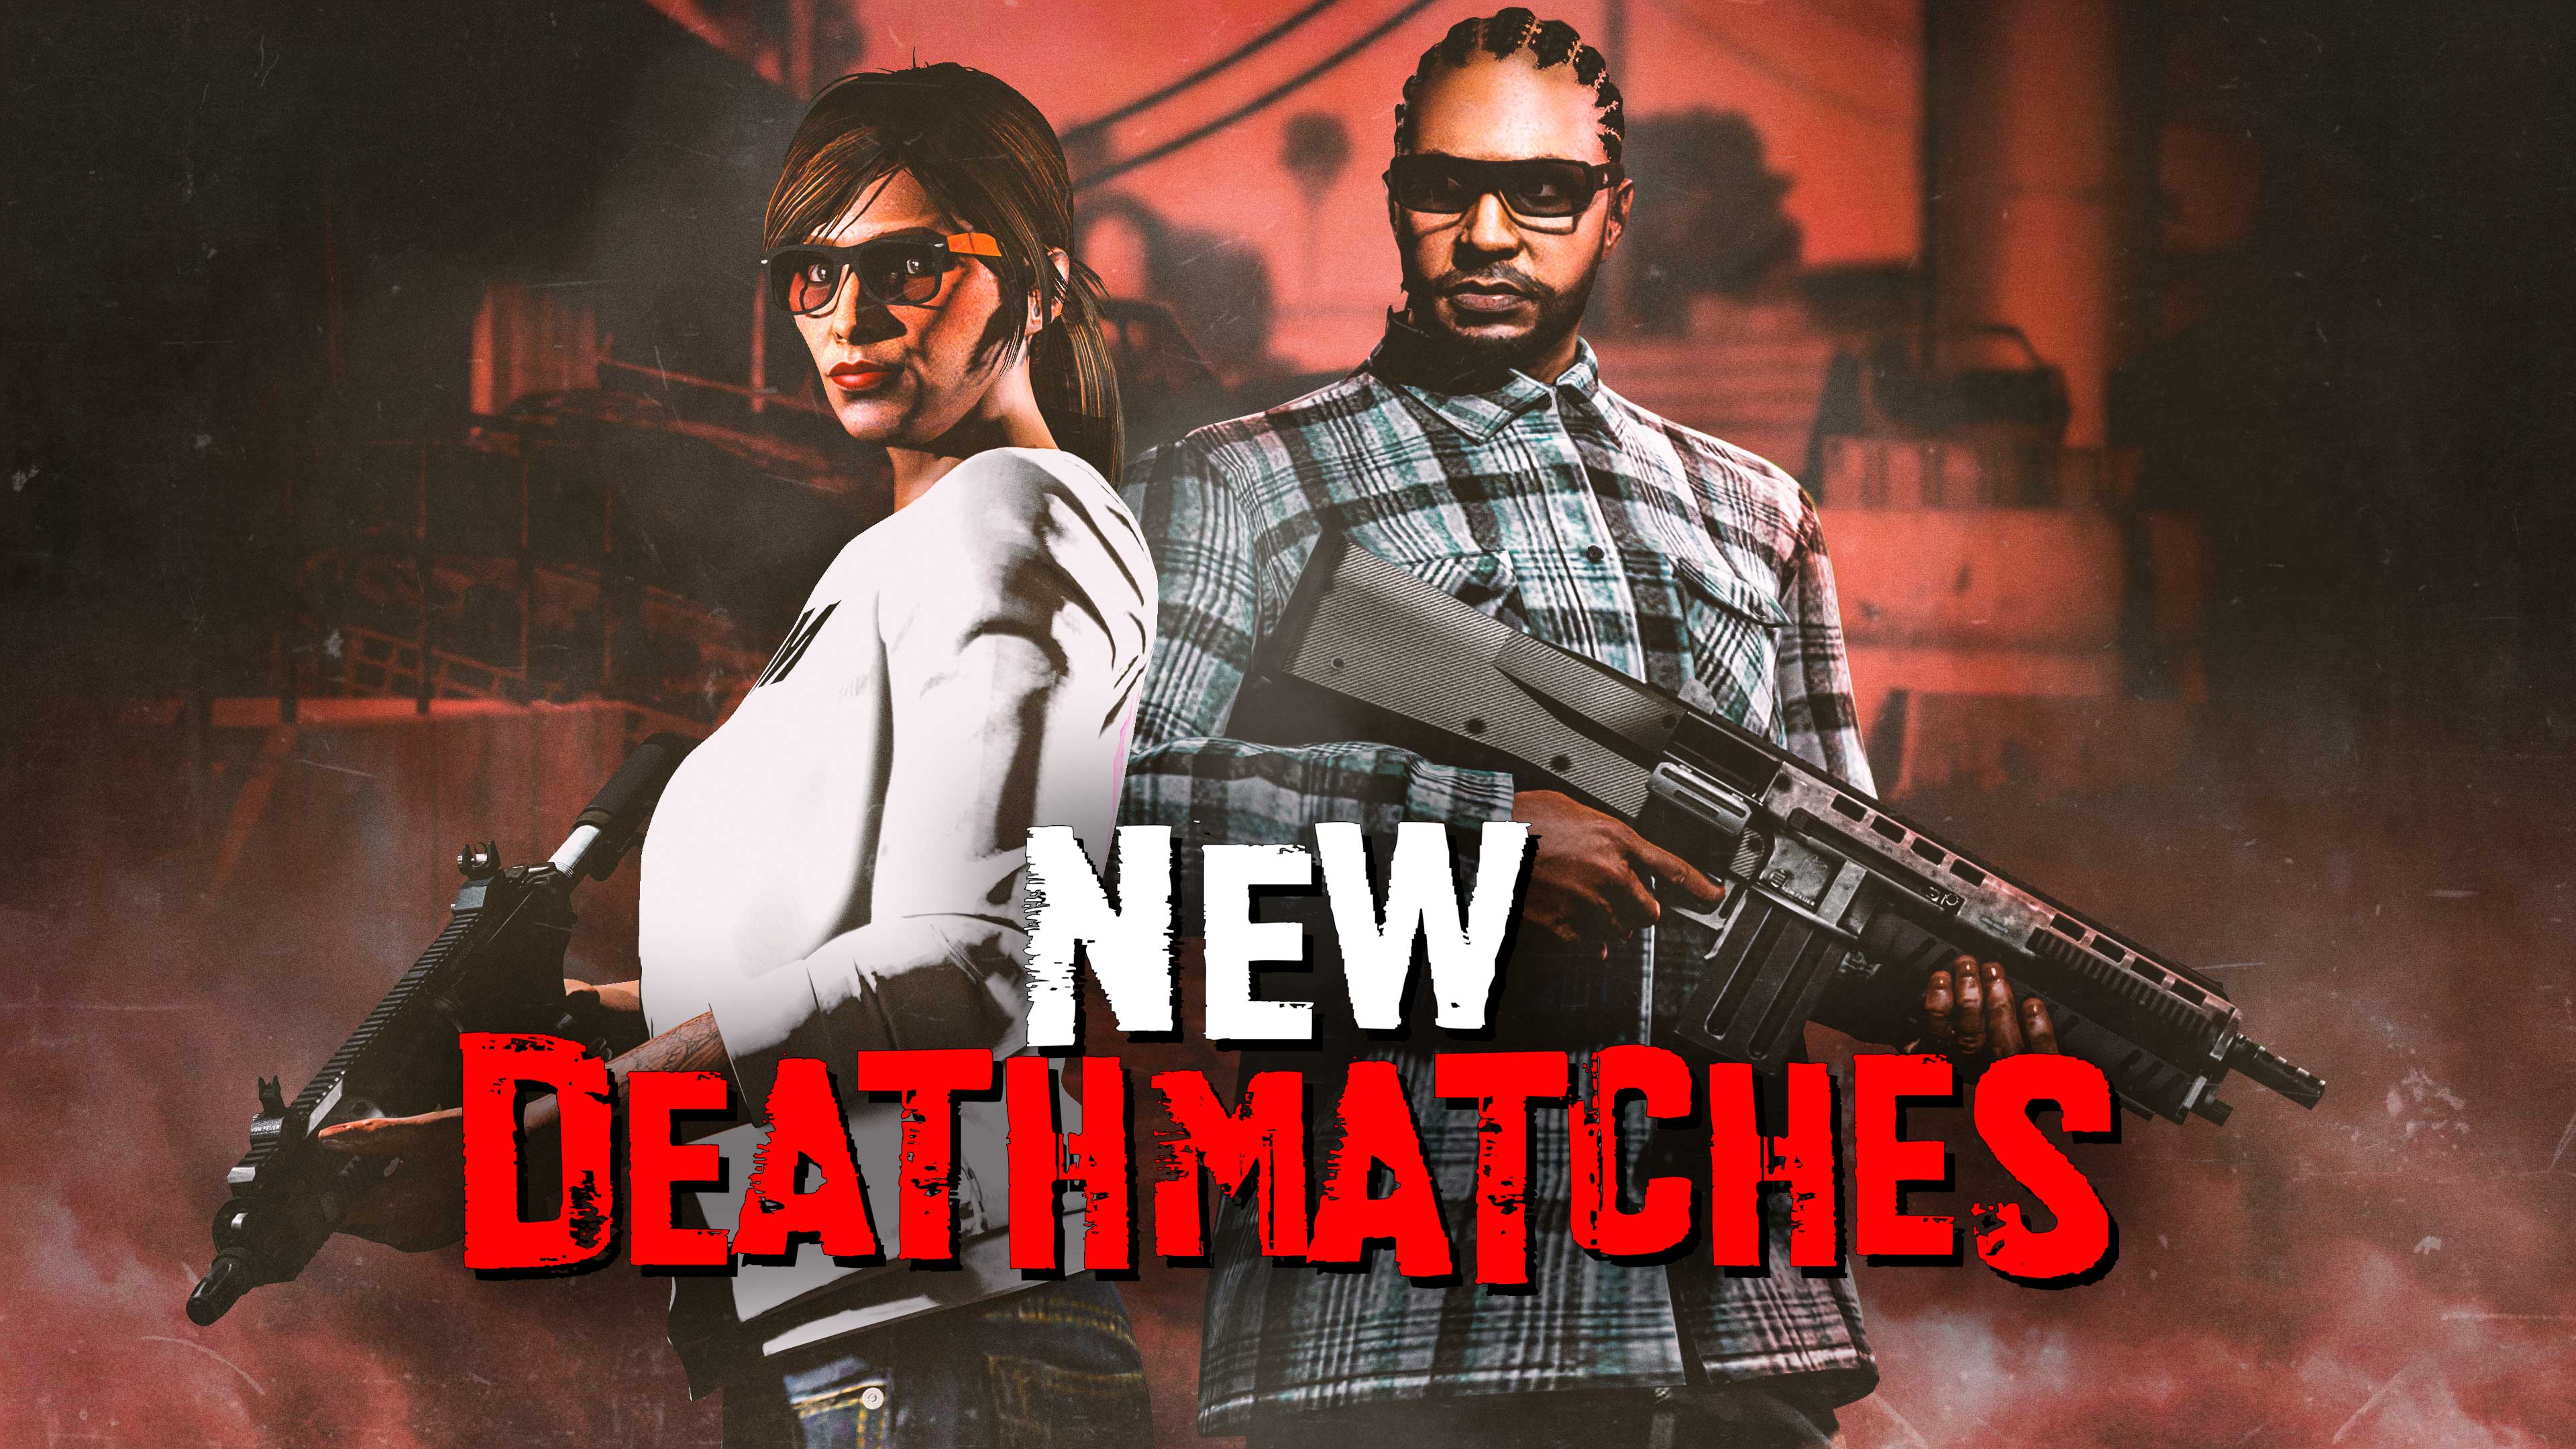 Create your own deathmatches and races in GTA Online this week - GameSpot